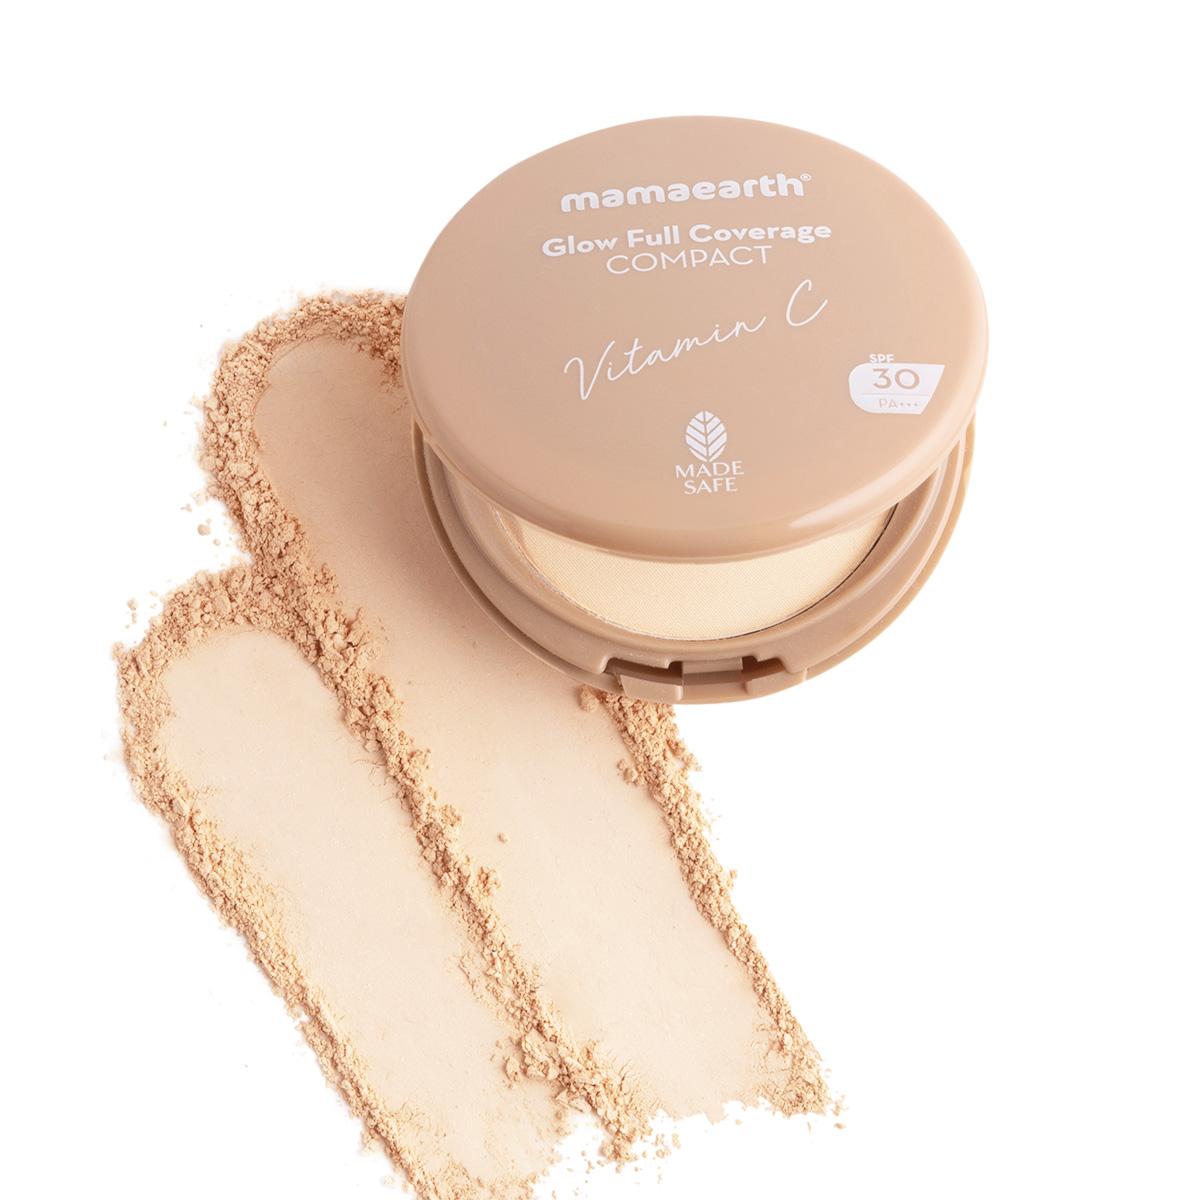 glow full coverage compact with spf 30 - 9g | ivory glow